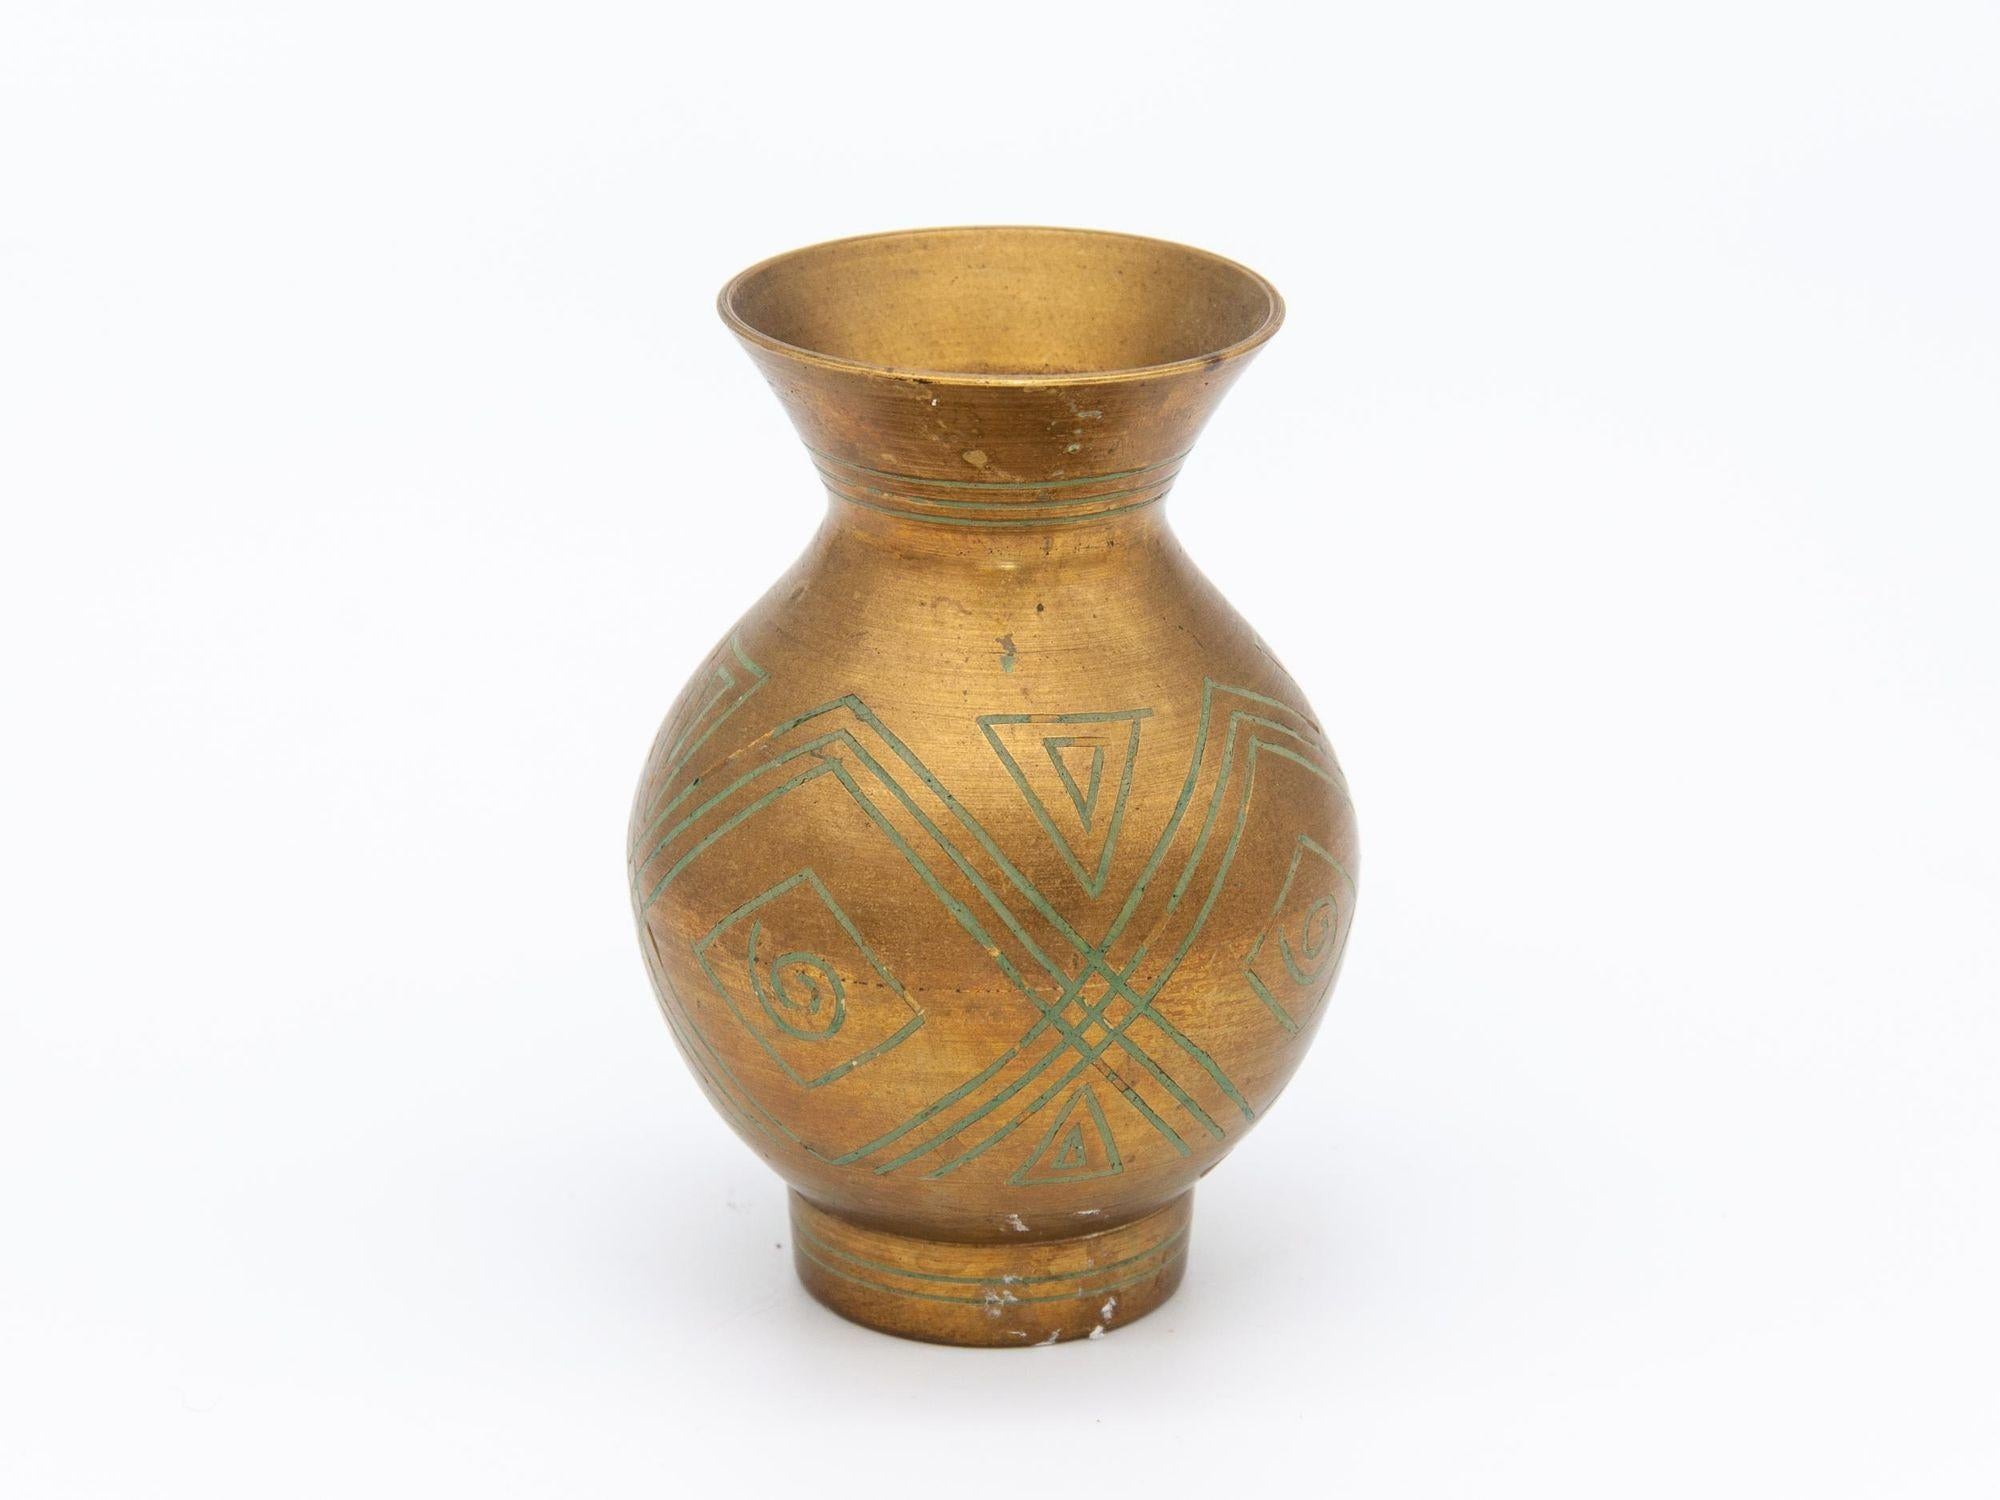 American Vintage Small Brass Vase with Geometric Etched Pattern on Surface